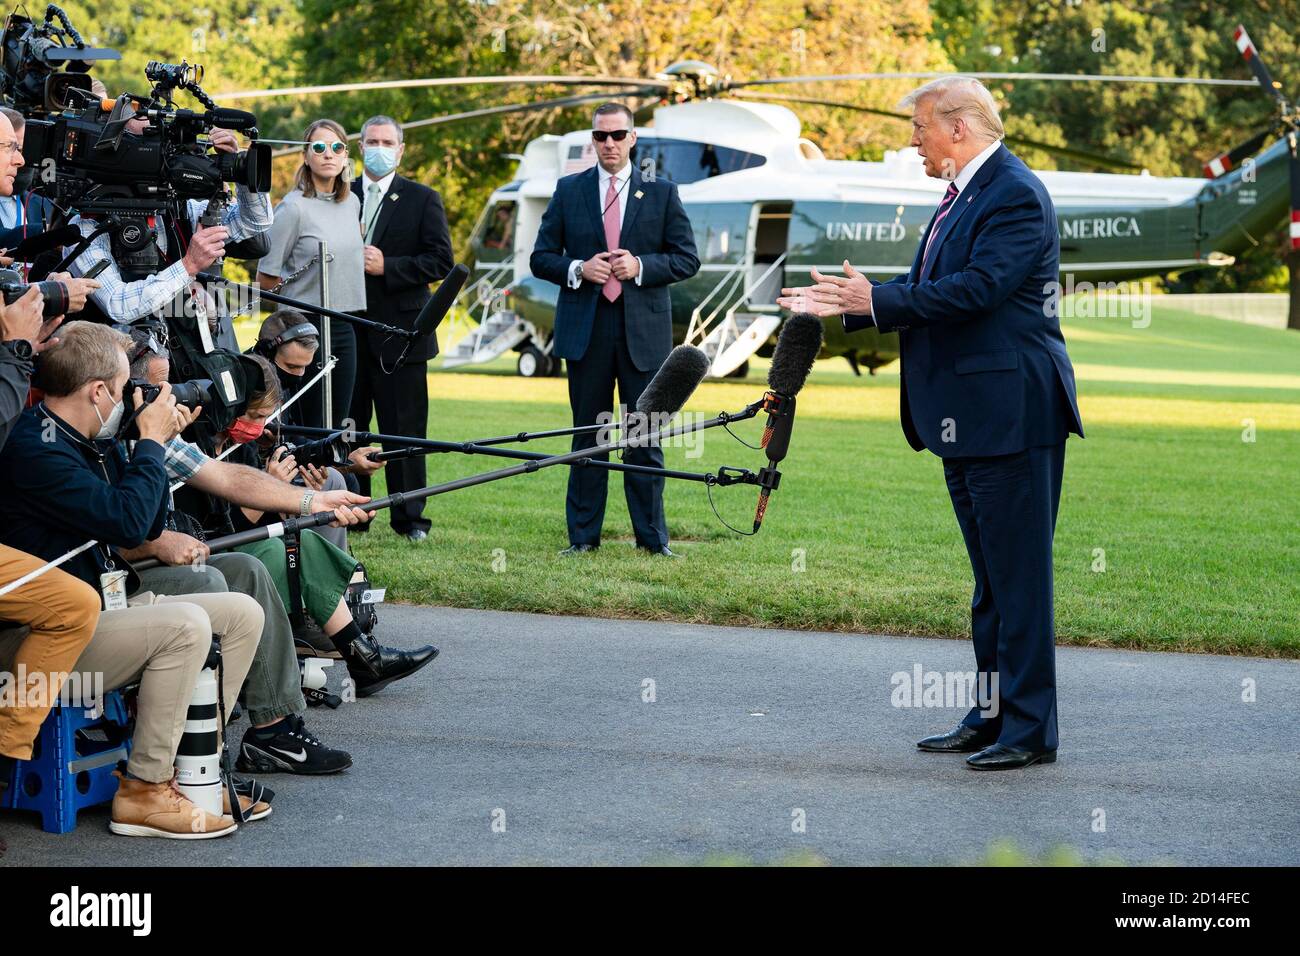 President Trump Travels to PA. President Donald J. Trump talks to members of the press along the South Lawn driveway of the White House Tuesday, Sept. 22, 2020, prior to boarding Marine One en route to Joint Base Andrews, Md. to begin his trip to Pennsylvania. Stock Photo